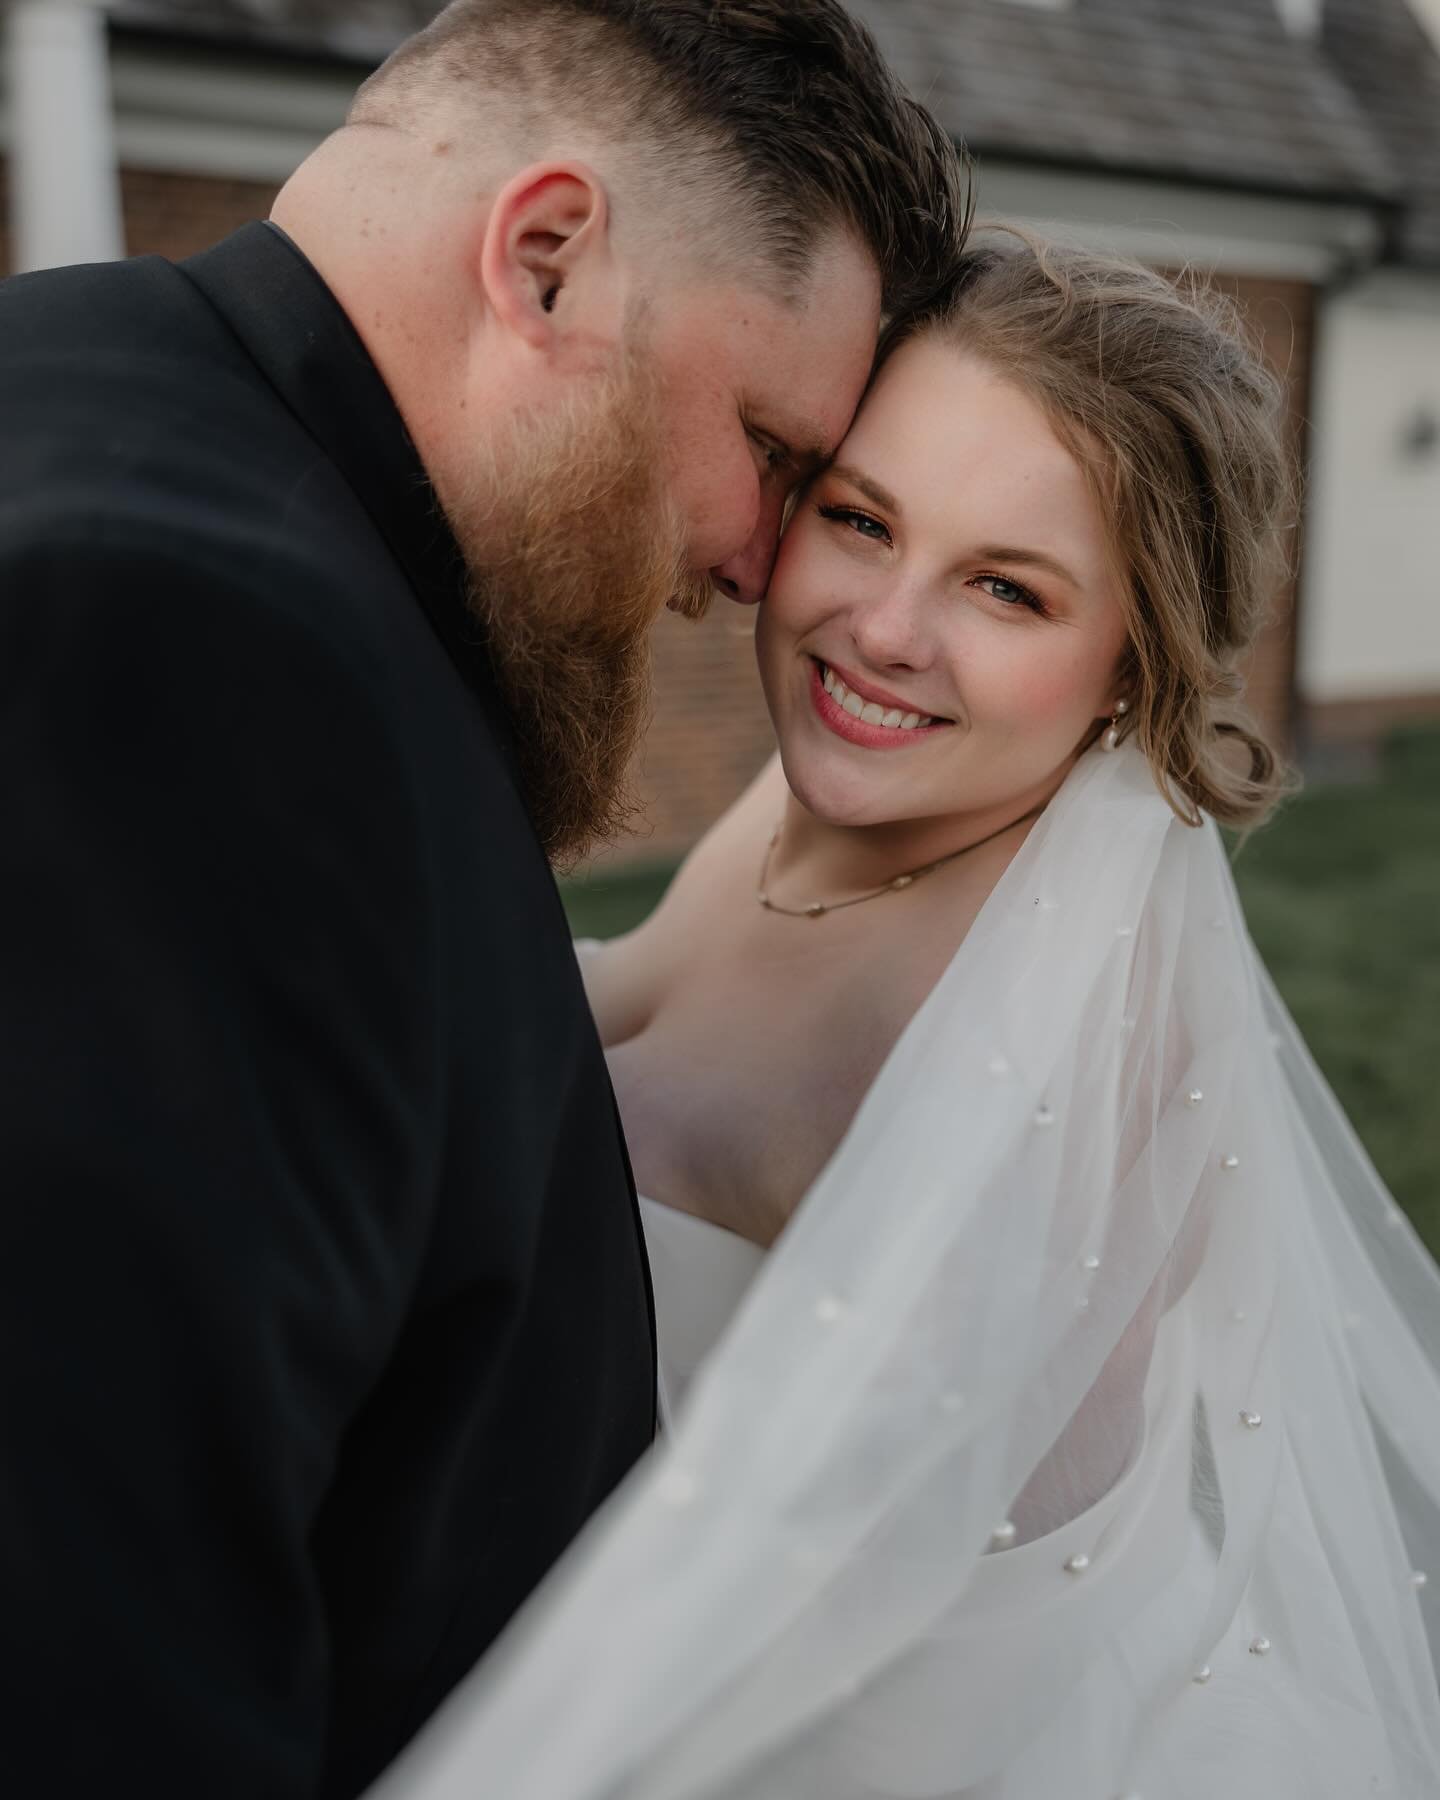 Happy one month (and a day!) of marriage to these two cuties! It was the most magical windy April day. Swipe to the very last image to see the moment that had ALL of us bawling 🥹